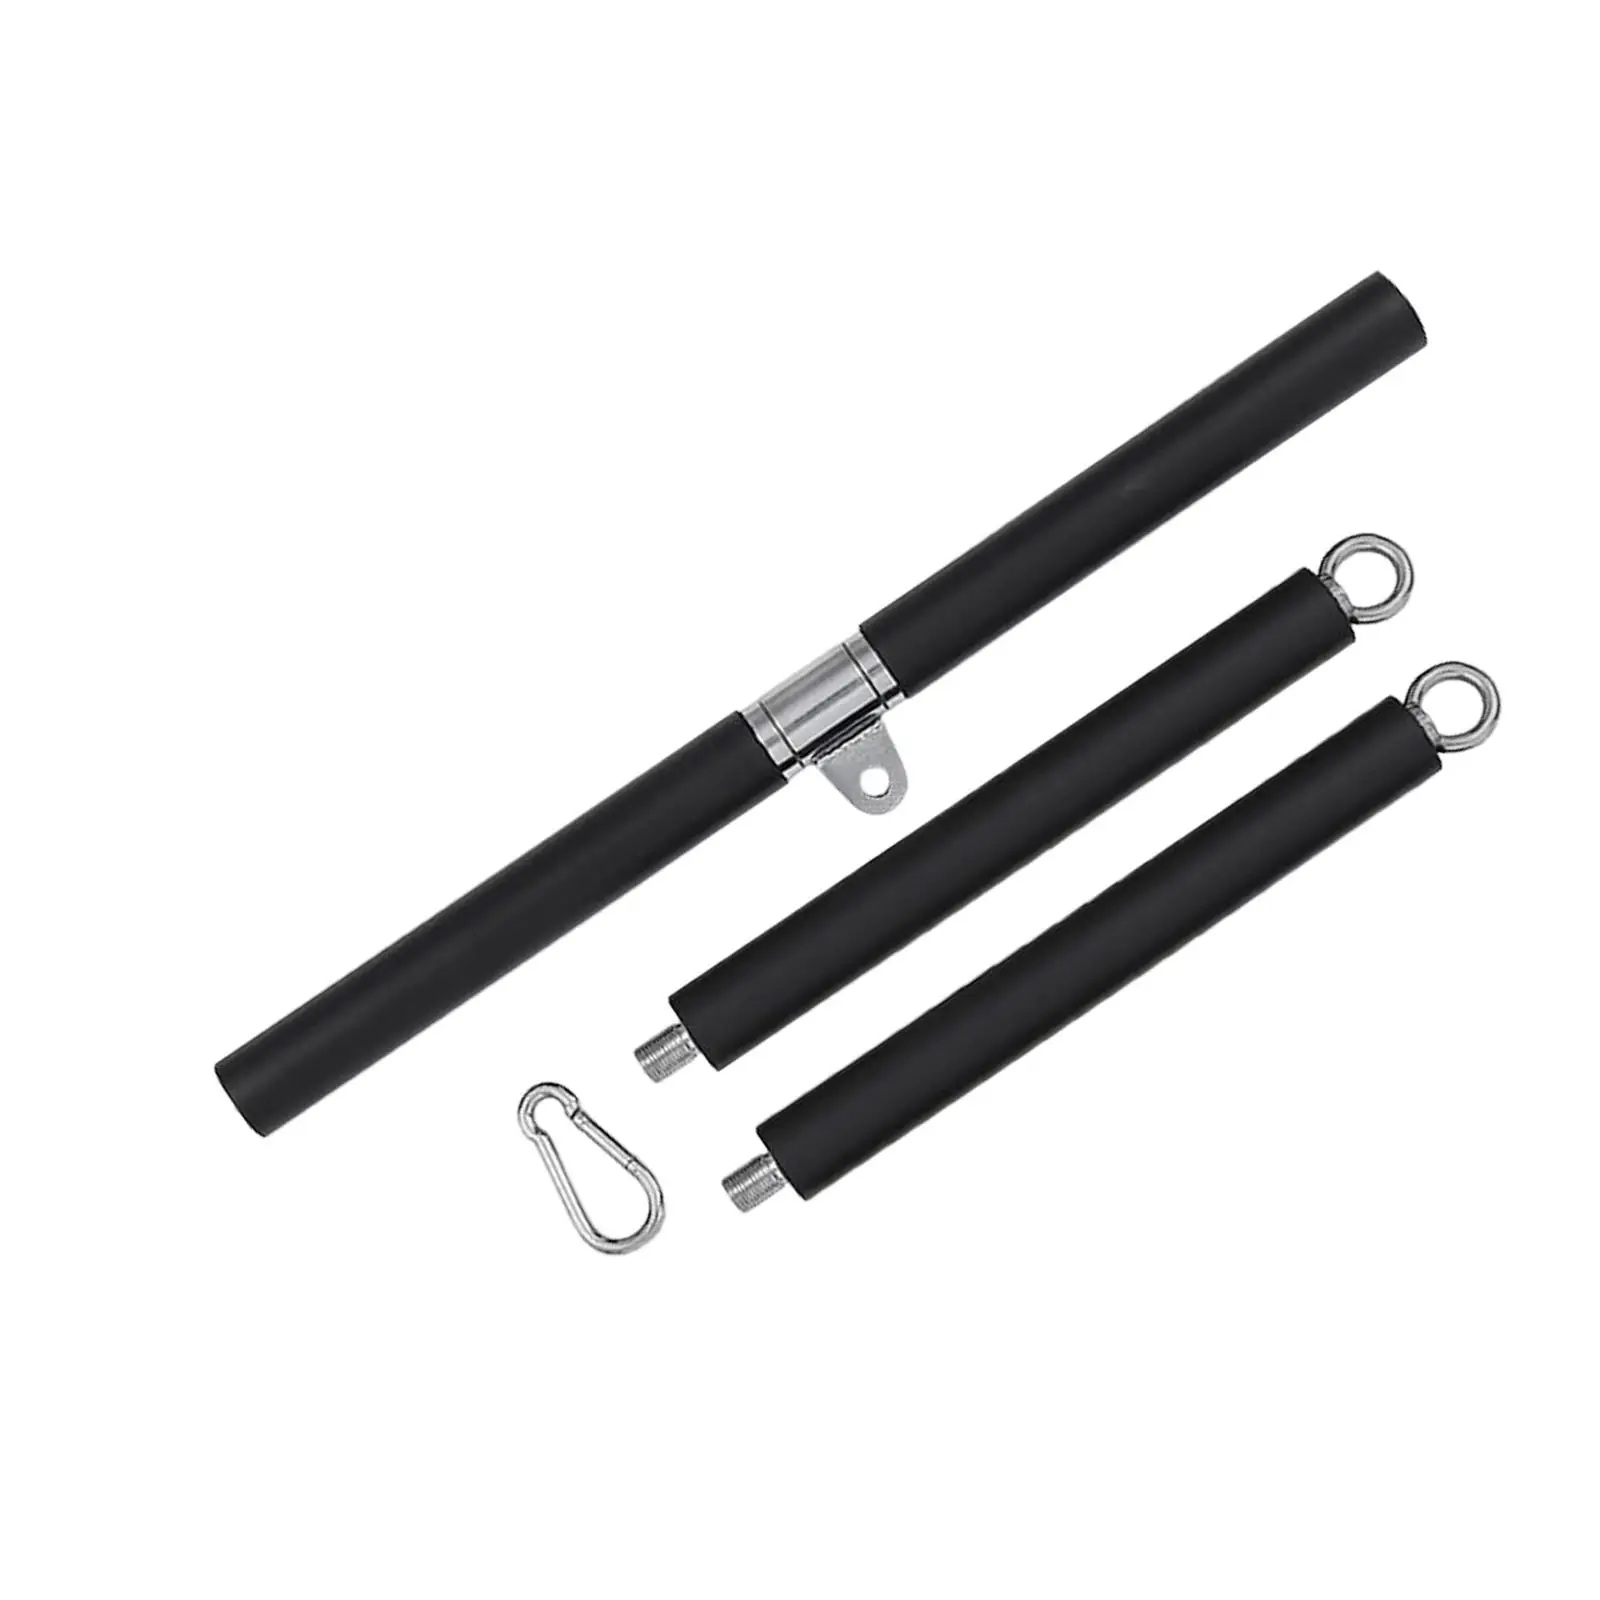 Pull Down Bar, Heavy Duty Durable Resistance Band Bar Adjustable Exercise Equipment Gym for Workout Biceps Muscles Building Gym